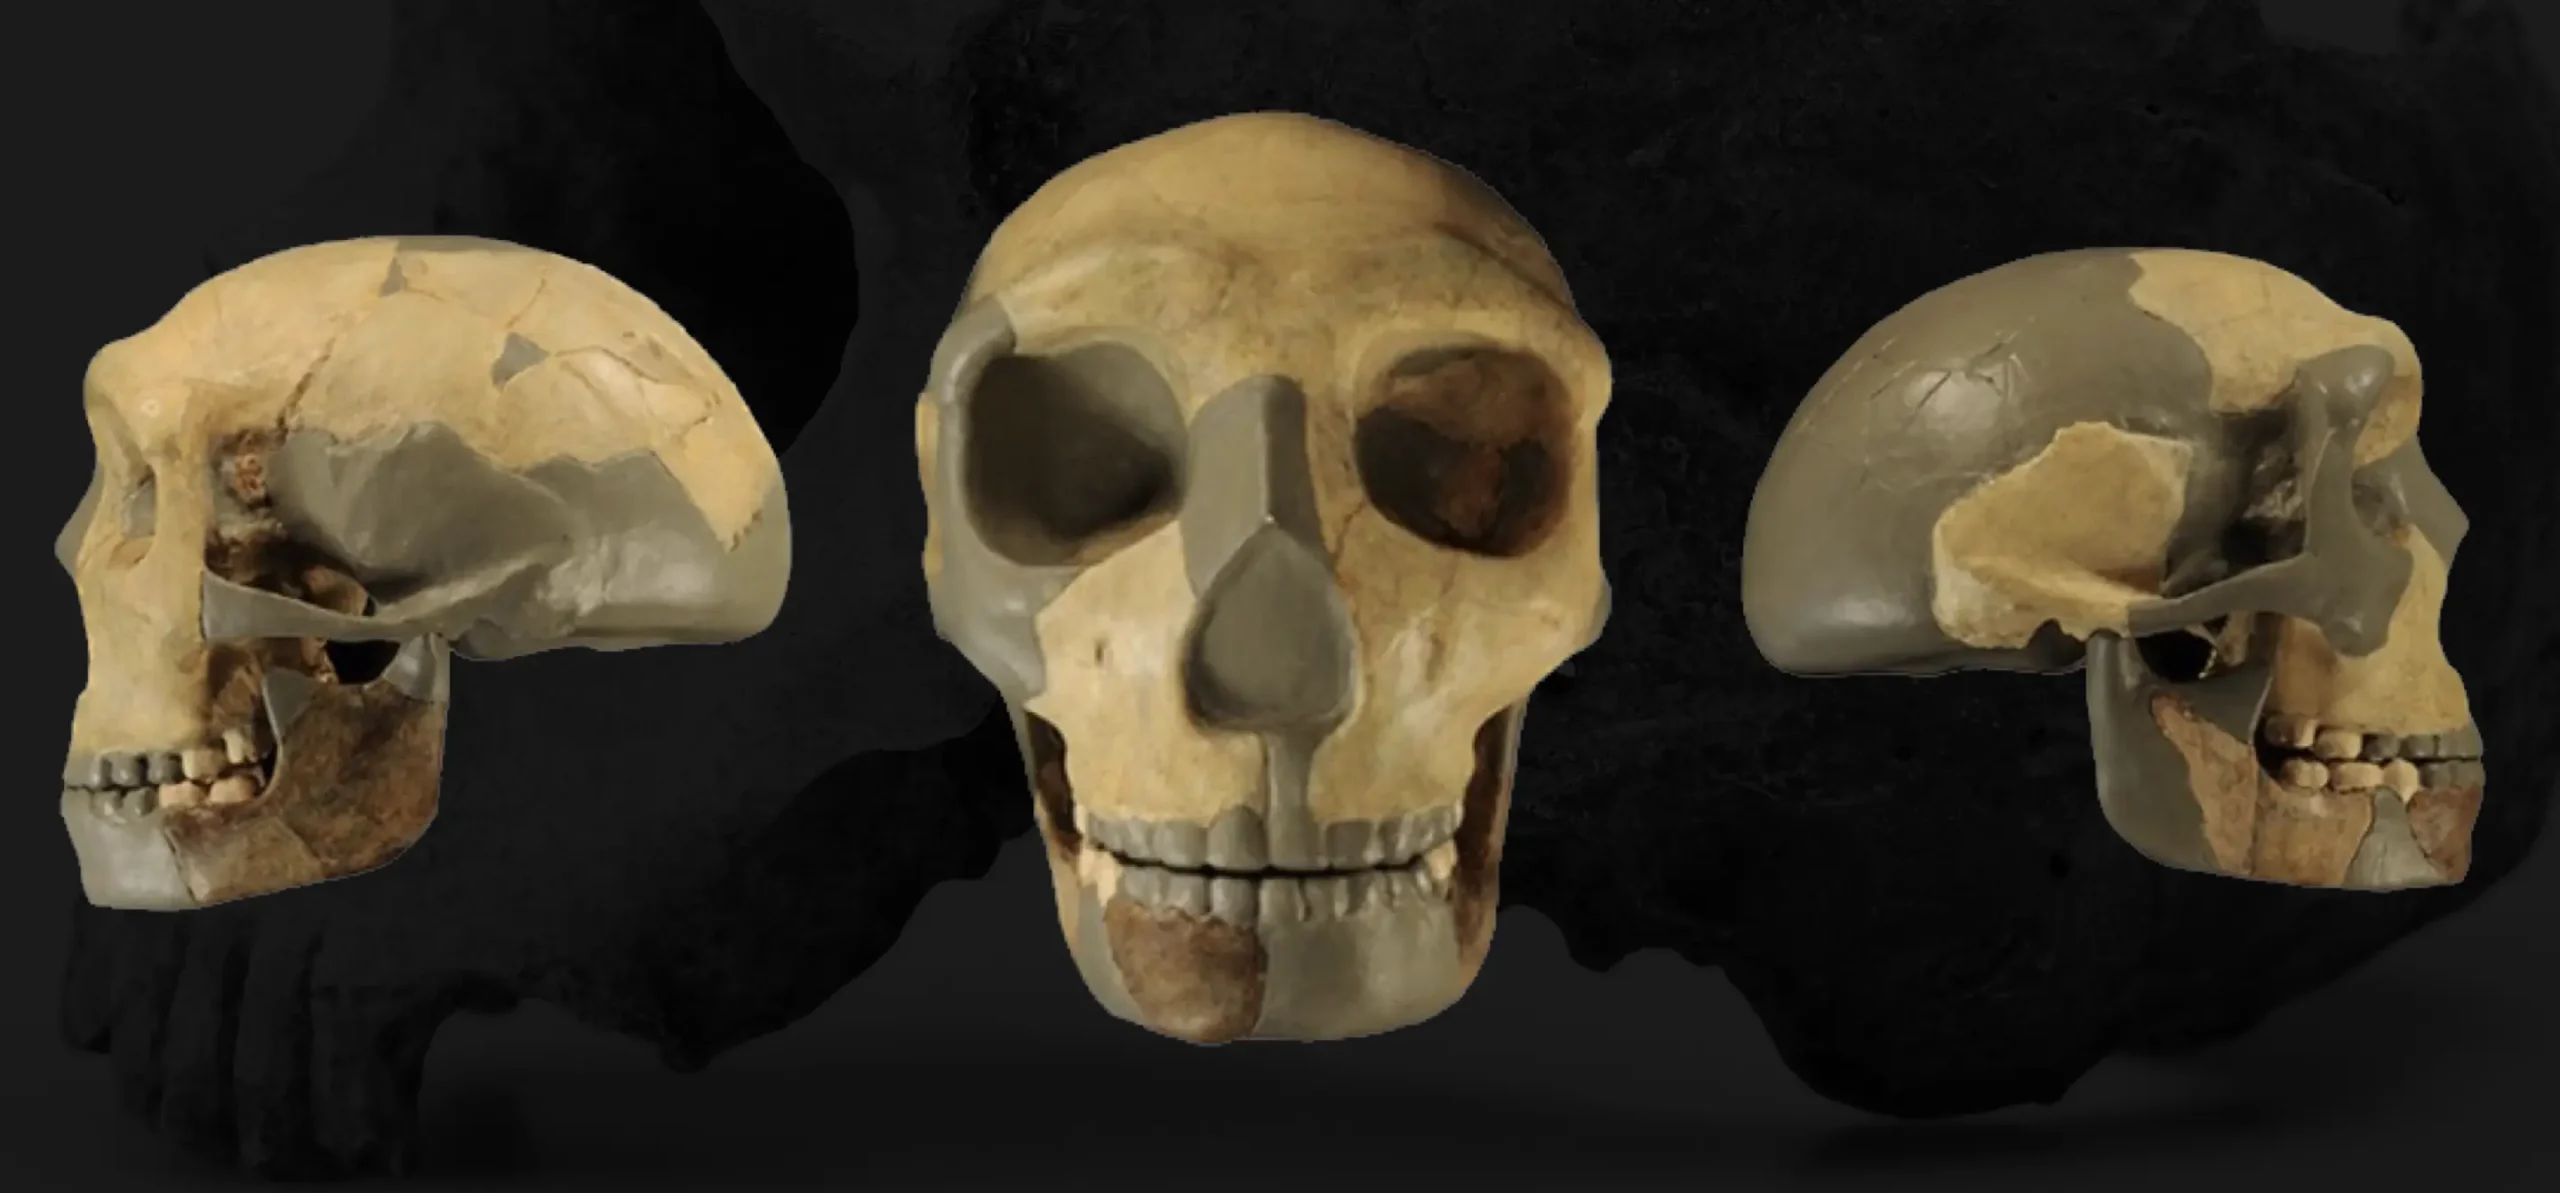 Ancient Skull Discovery in China Raises New Questions on human Evolution